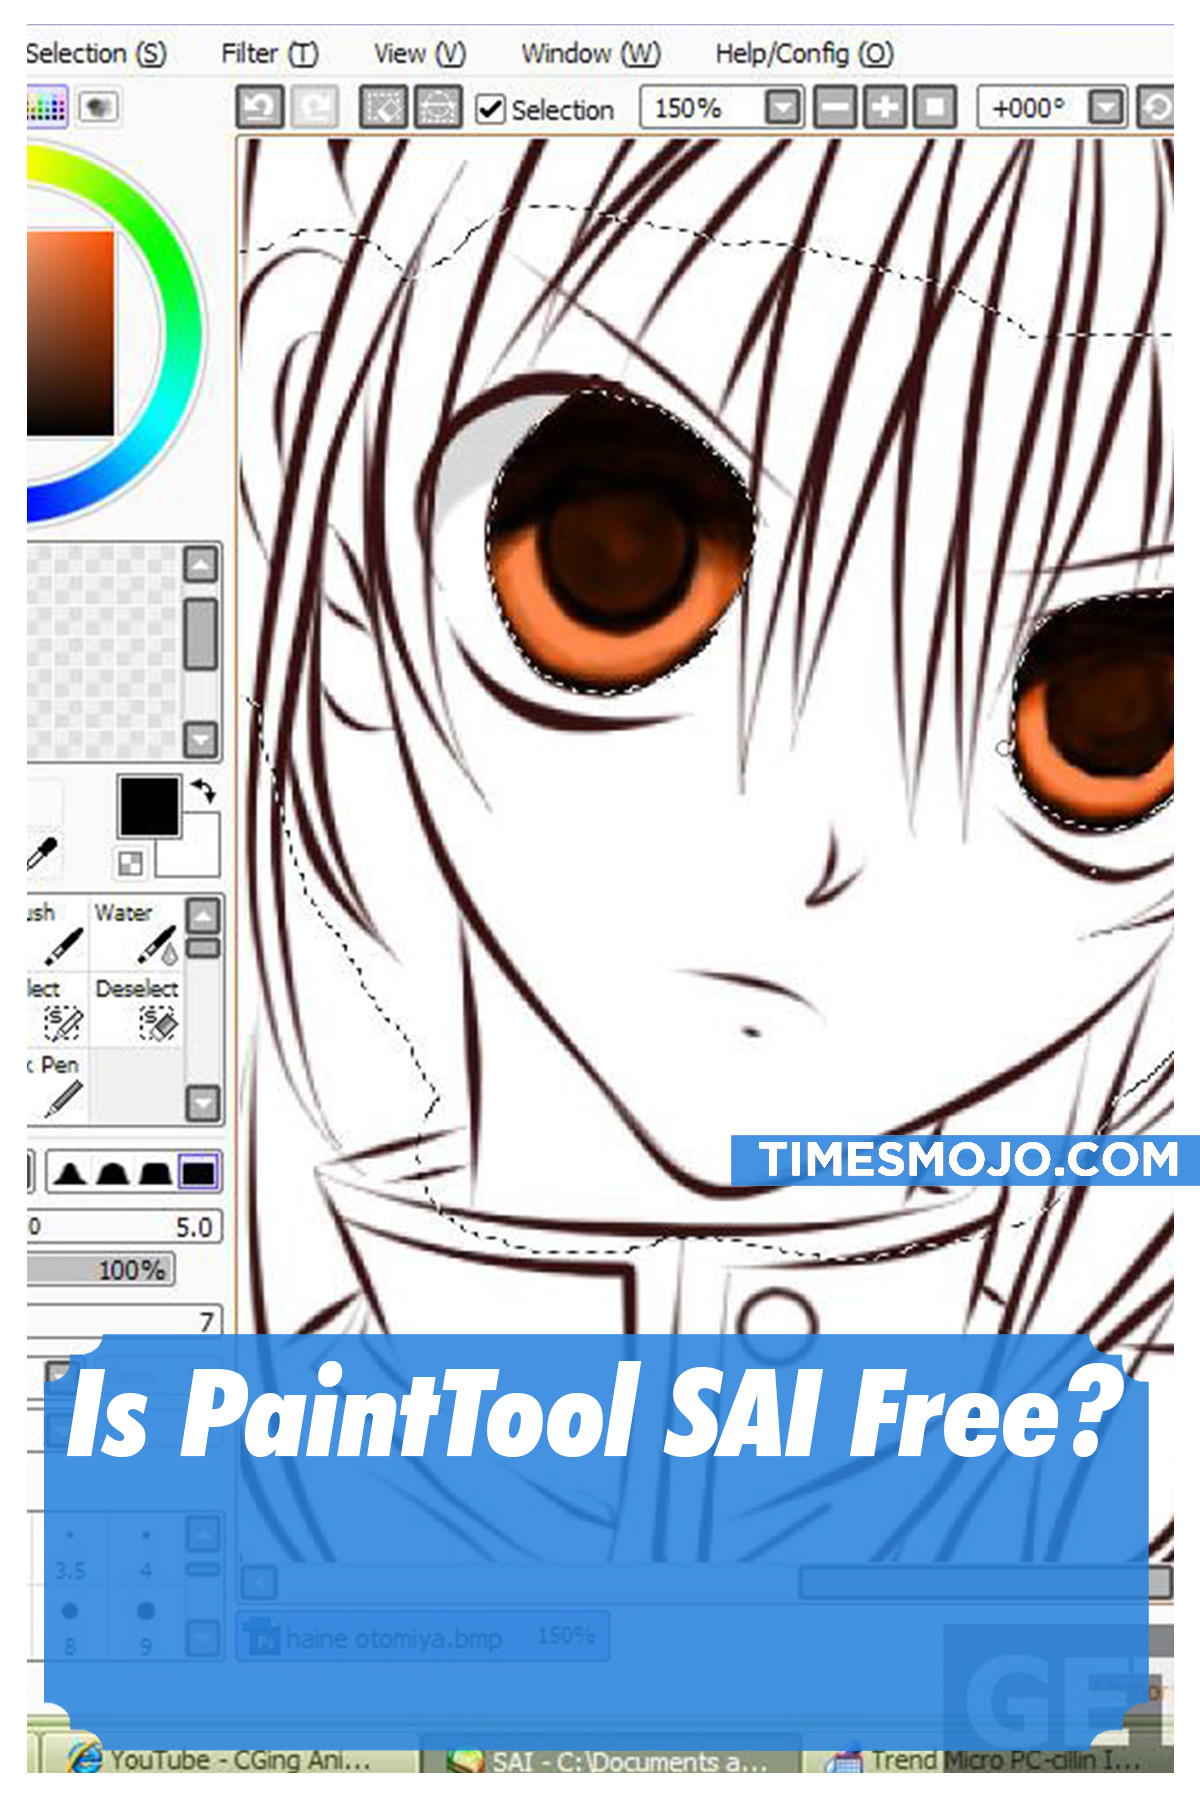 for iphone download PaintTool SAI free